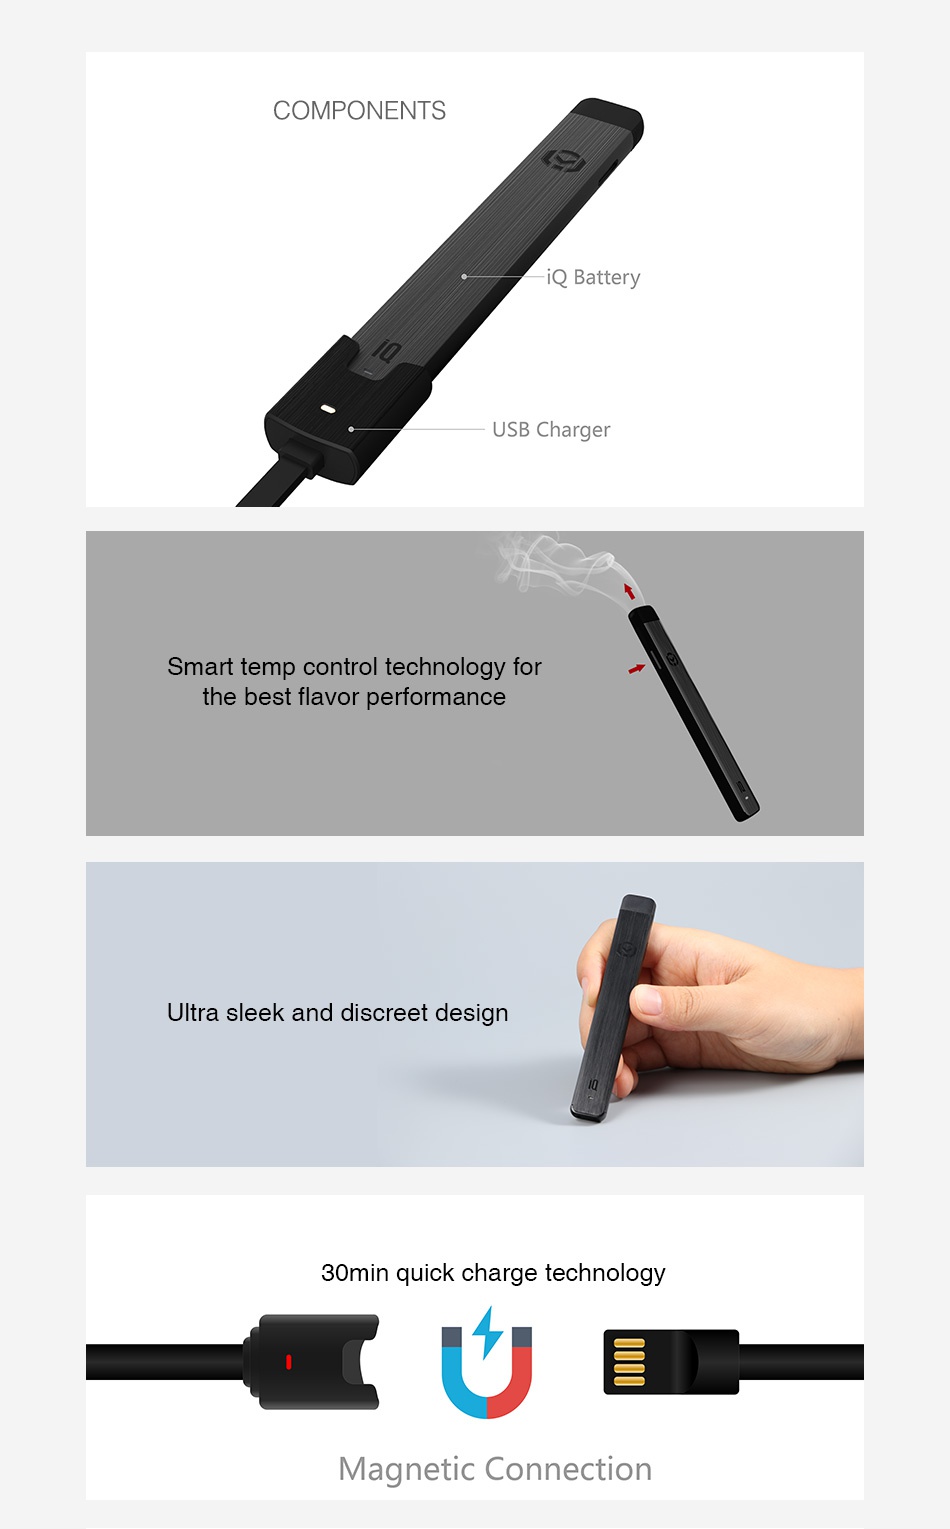 IQ Level Battery 200mAh COMPONENTS atte ry USB Charger Smart temp control technology for the best flavor performance Ultra sleek and discreet design 30min quick charge technology Magnetic Connection